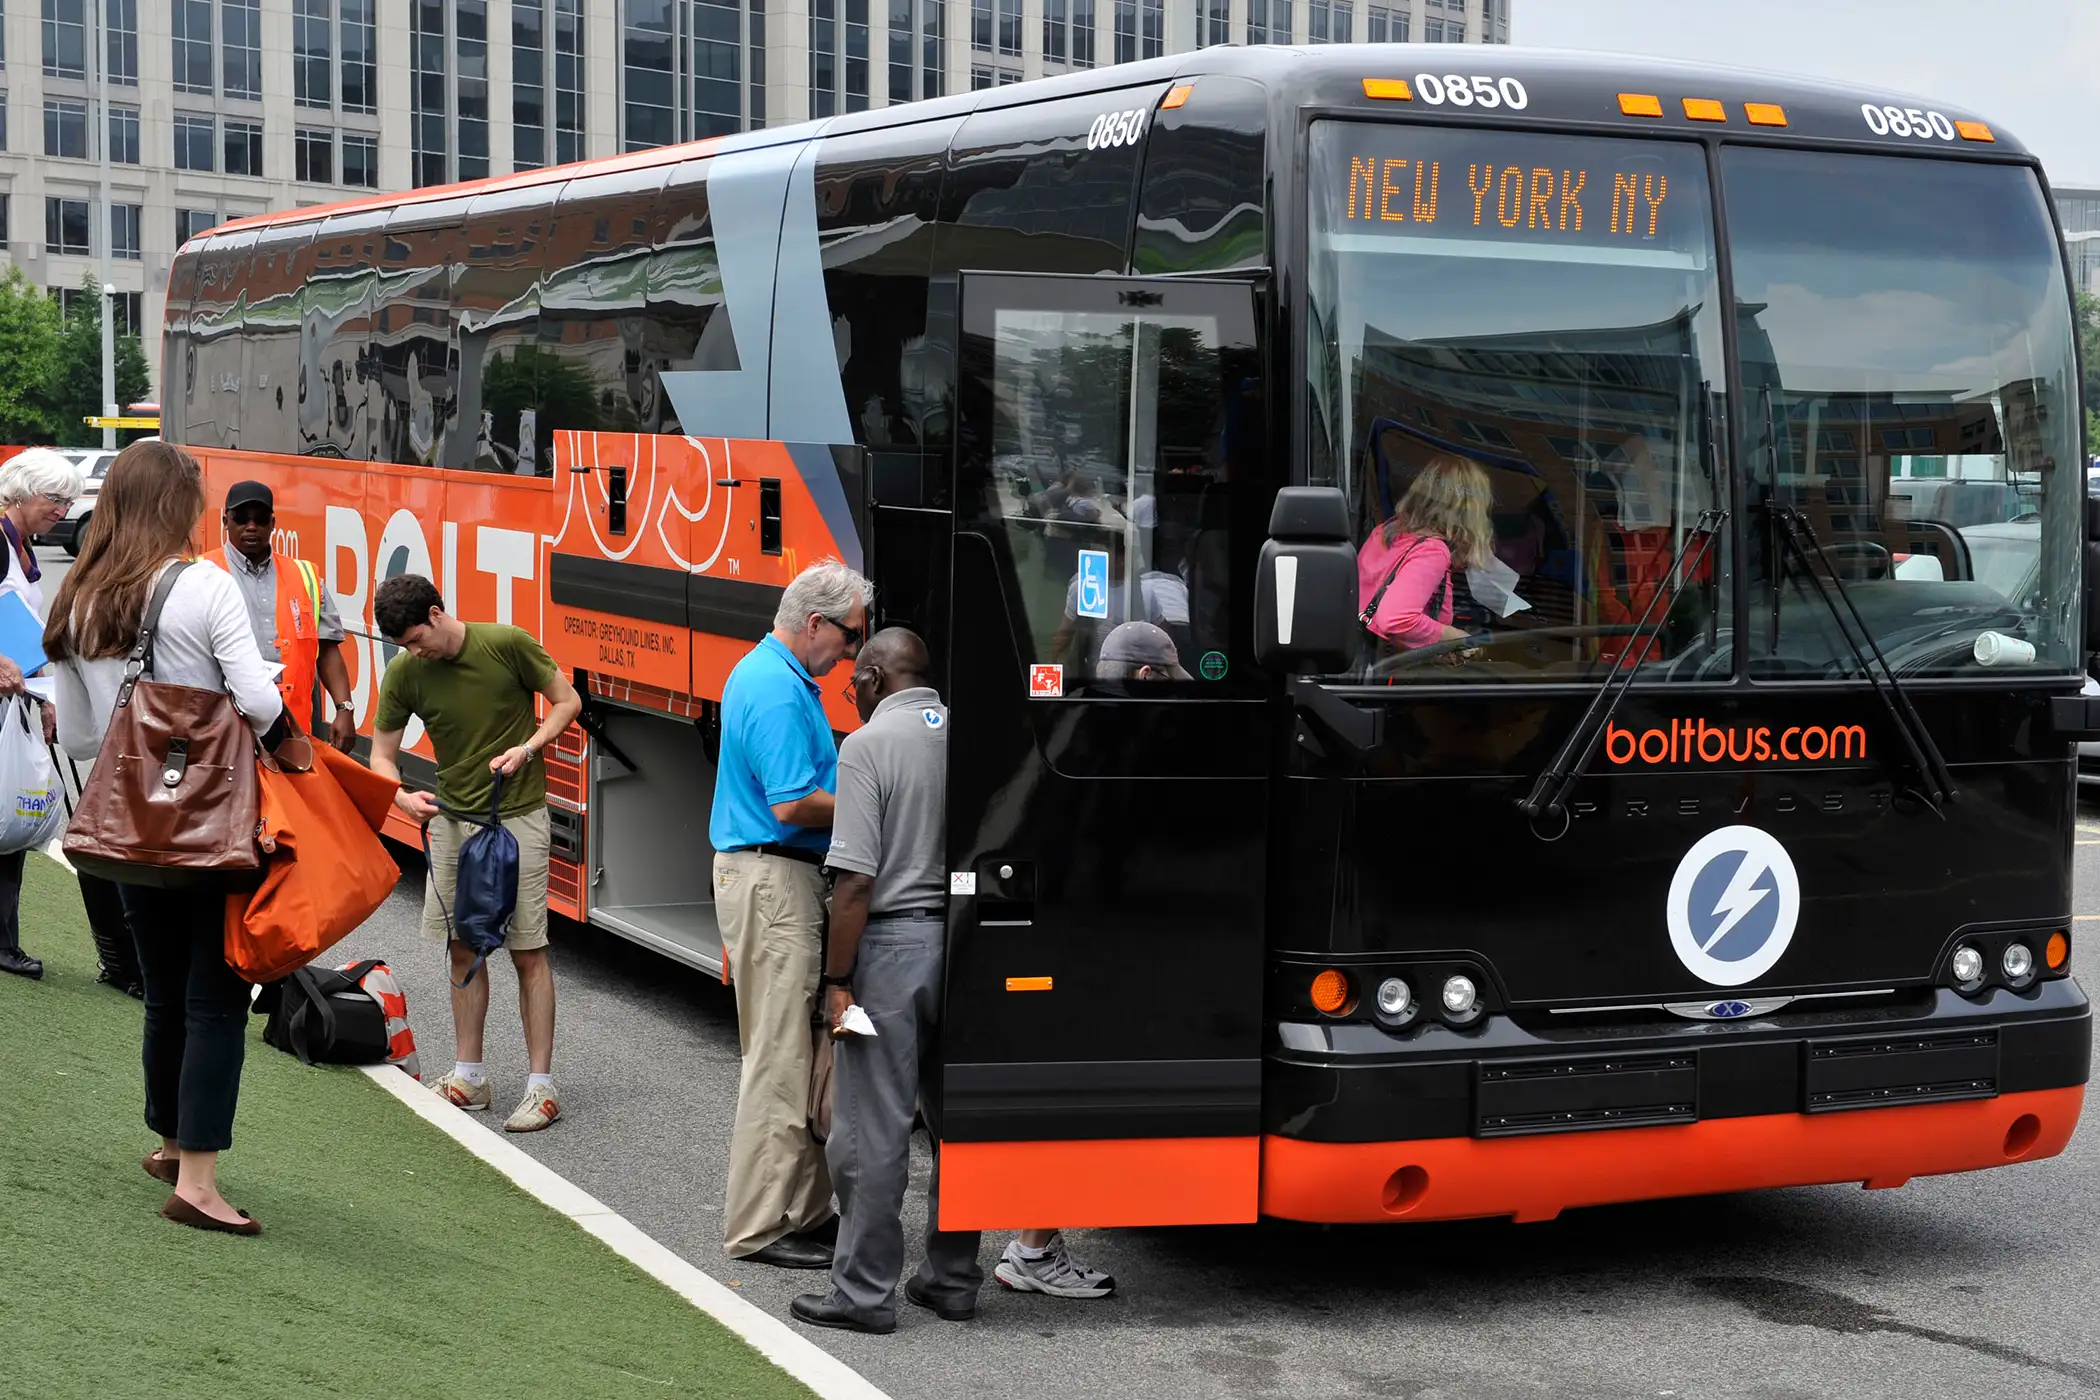 Passengers board a Bolt bus to New York in Washington, D.C.